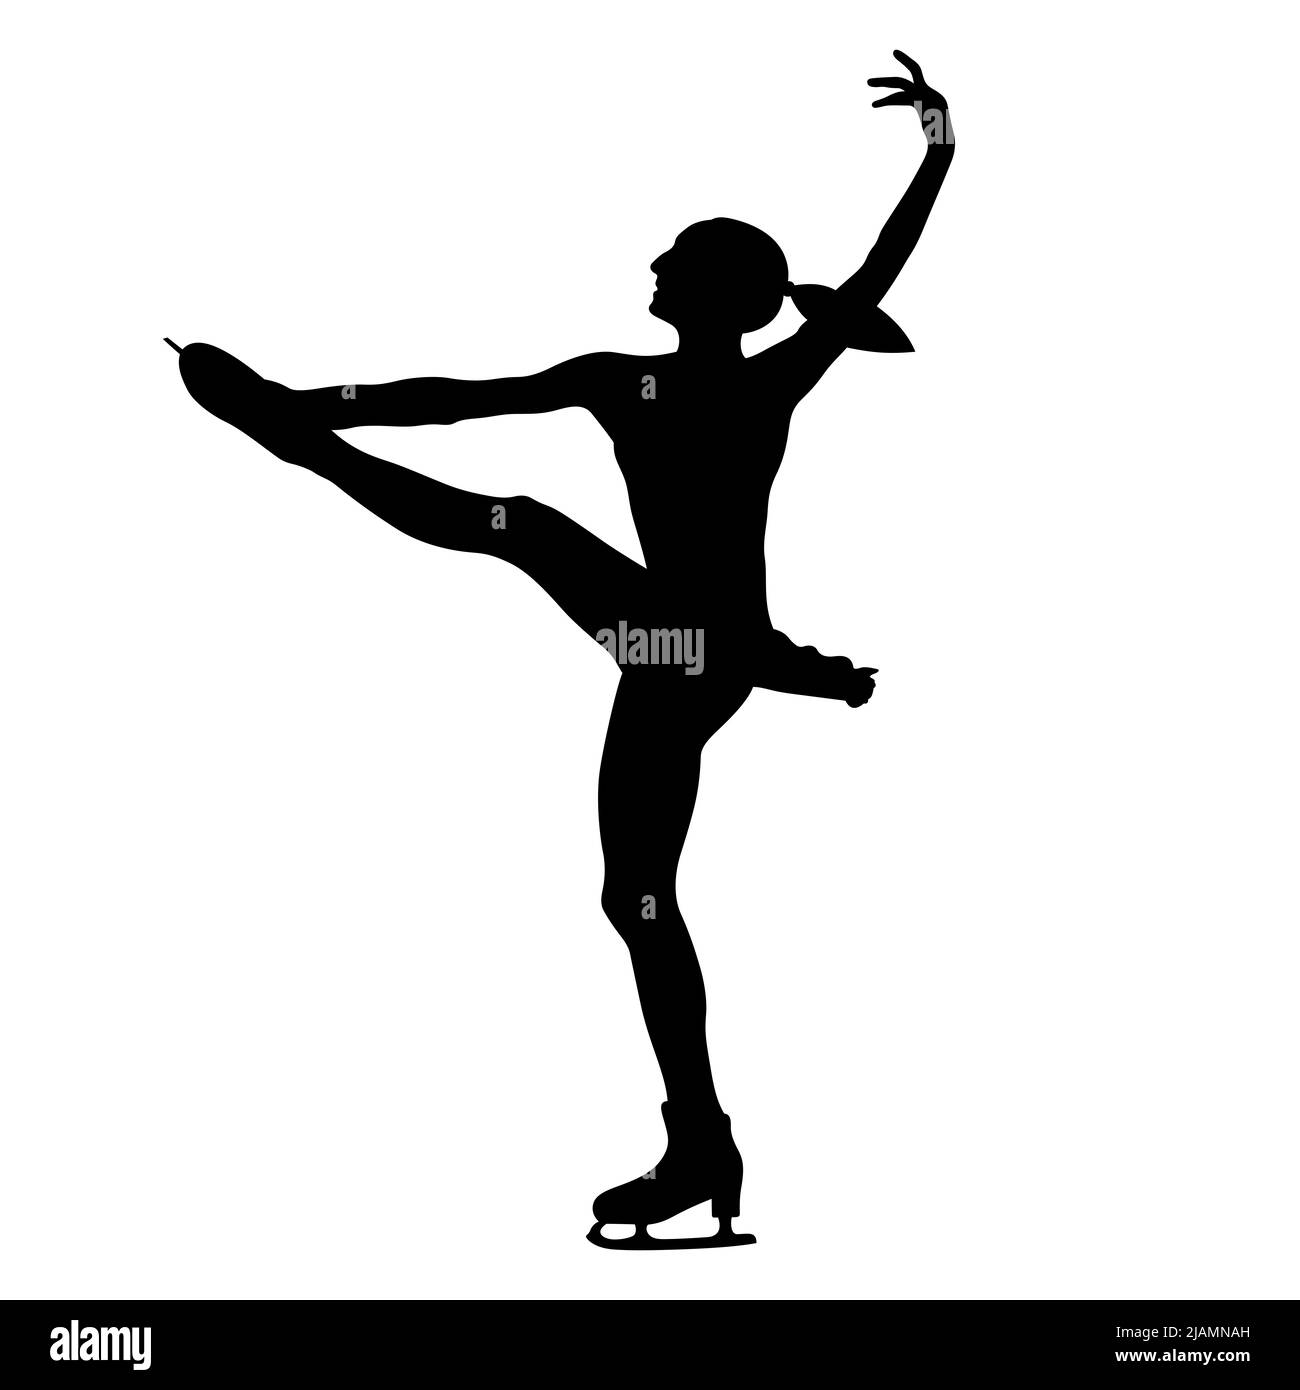 young girl figure skater black silhouette Stock Photo